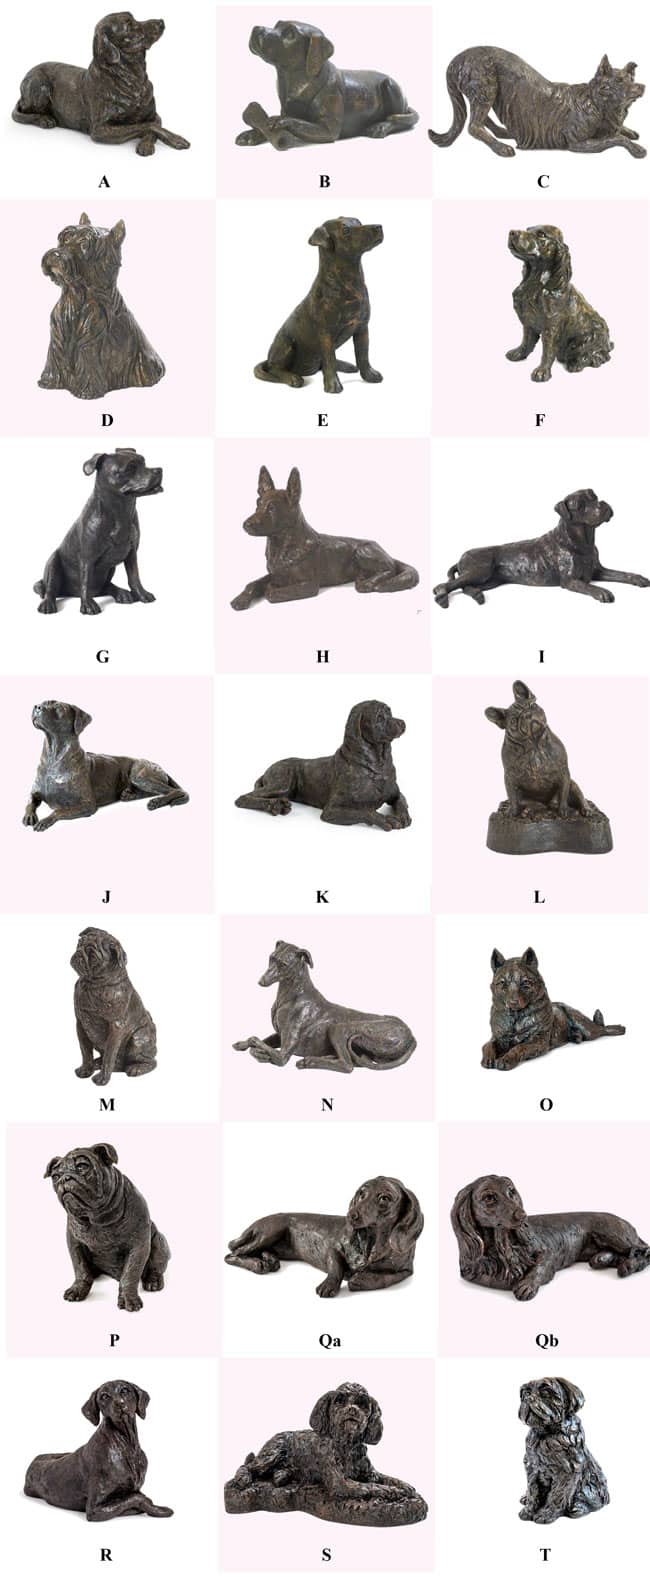 Lots of different dog statues